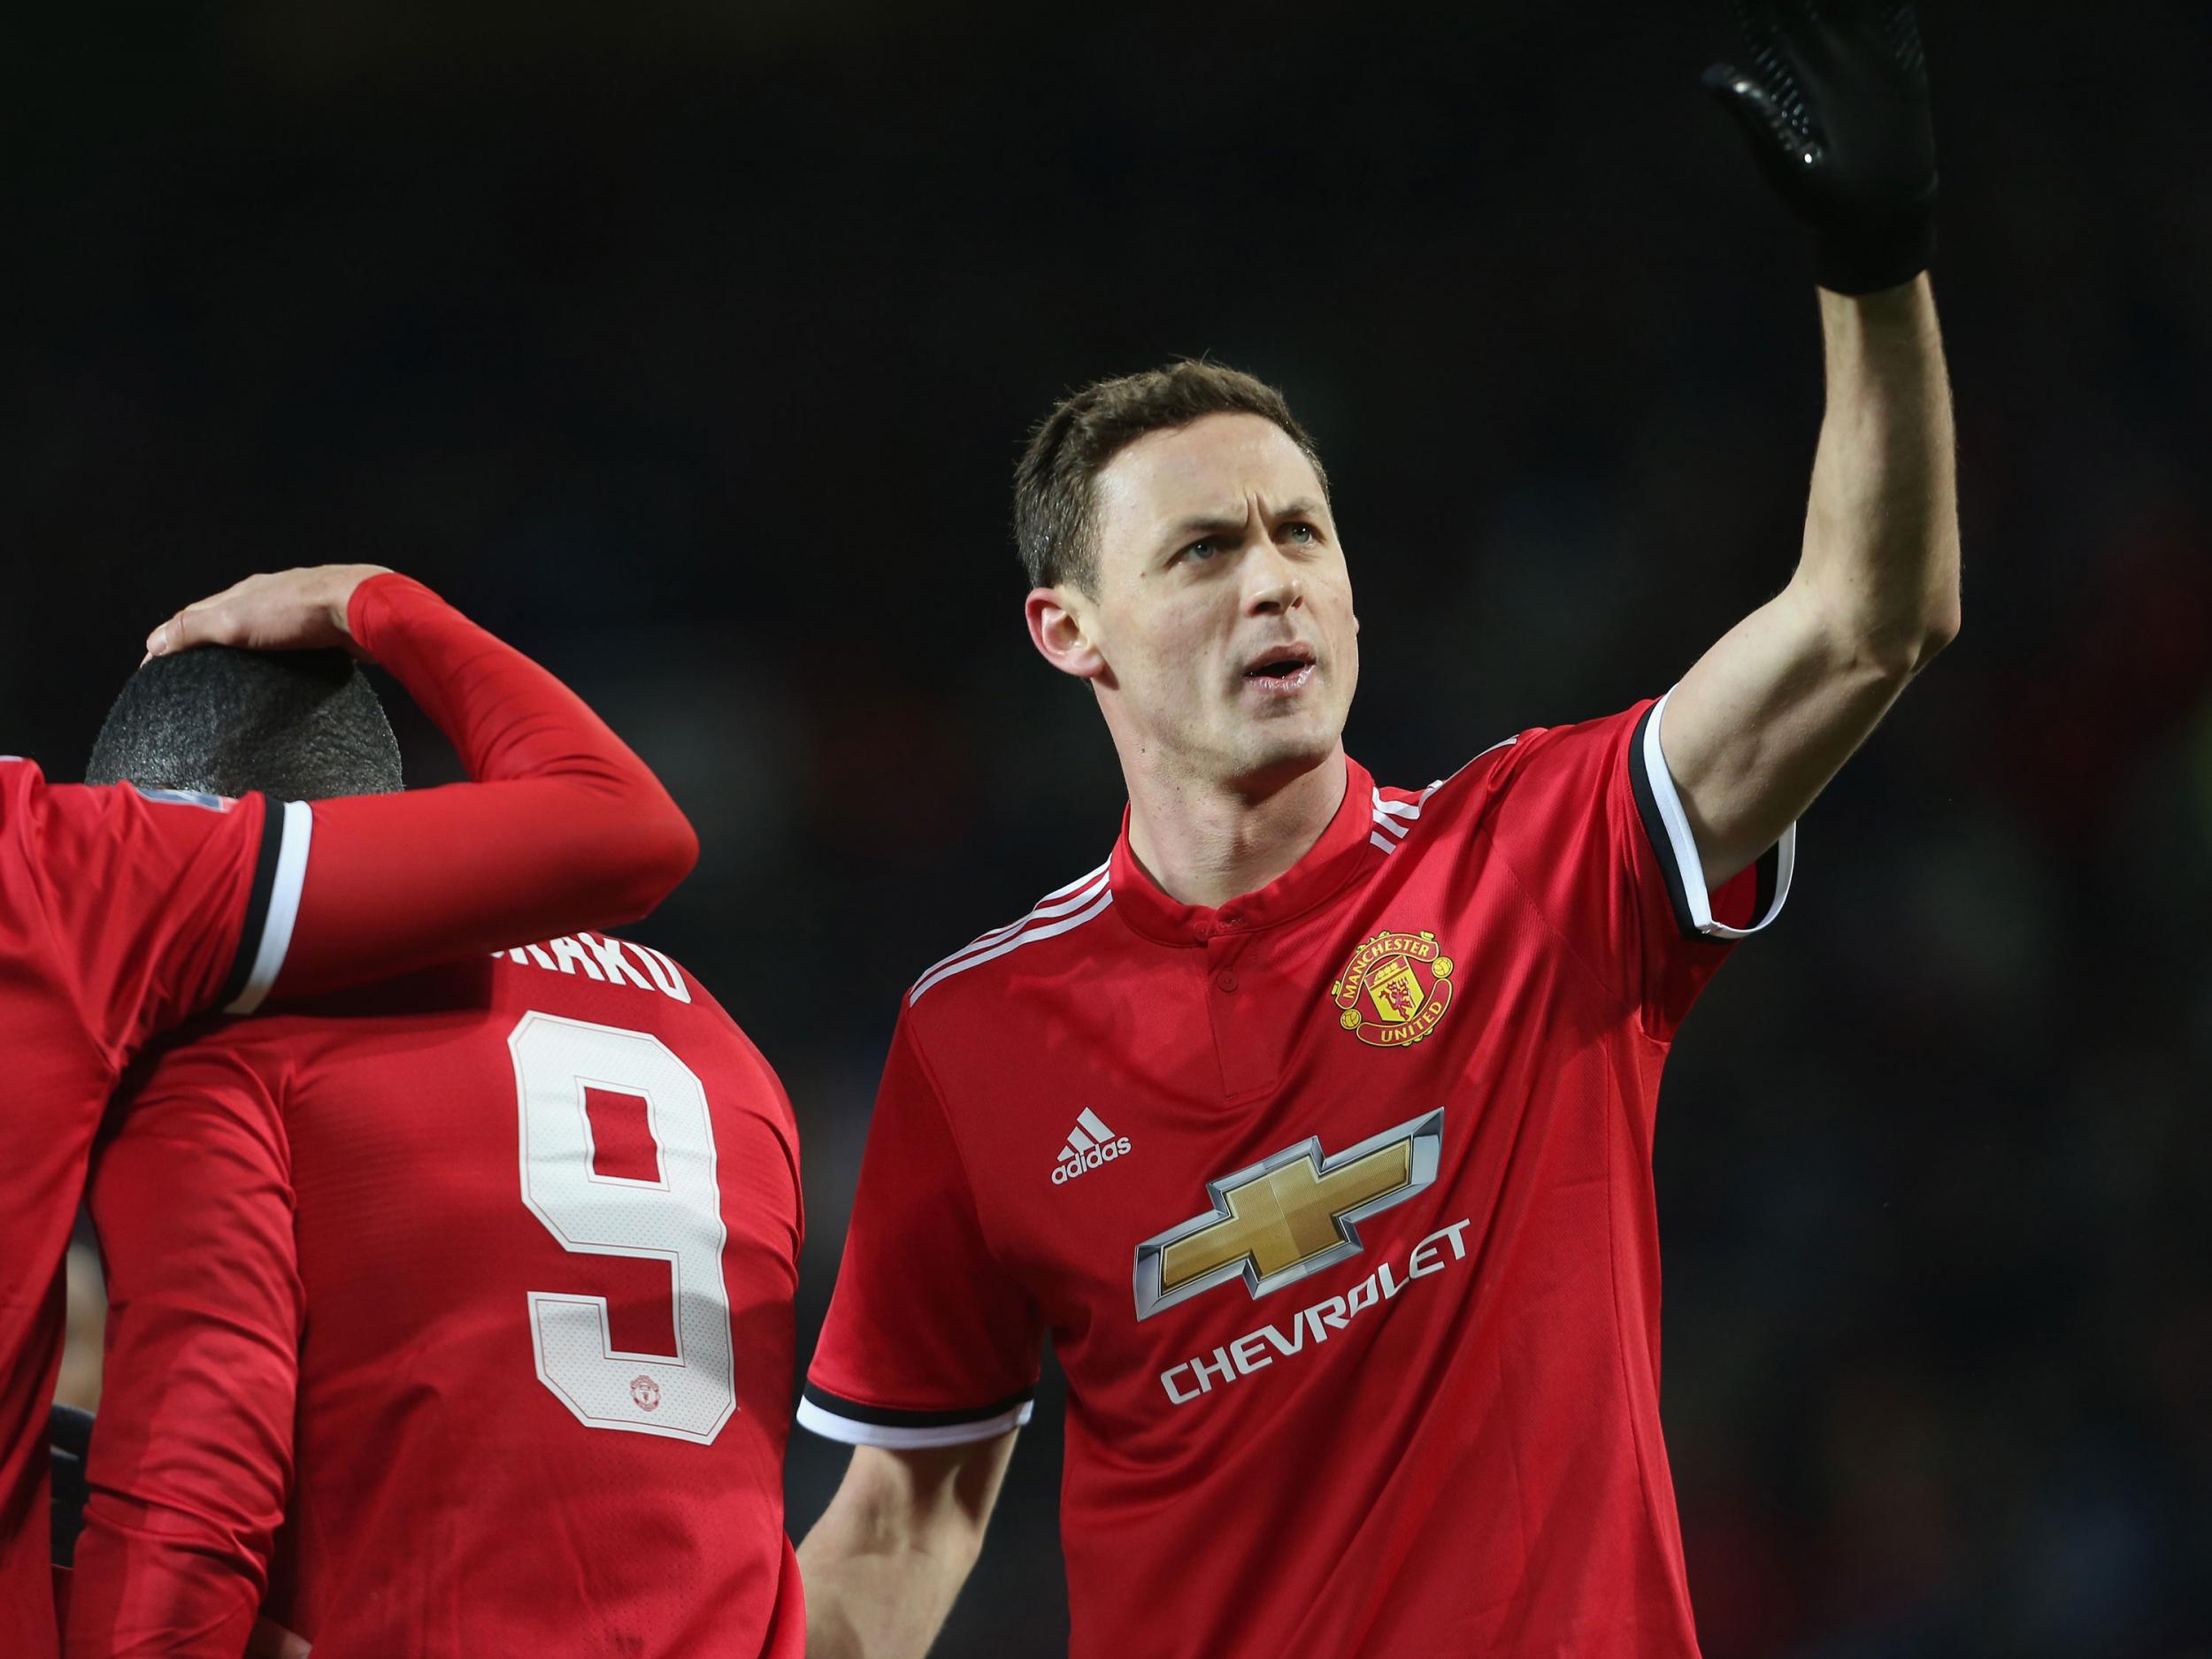 Nemanja Matic rounded off Manchester United's win with a late goal against Brighton